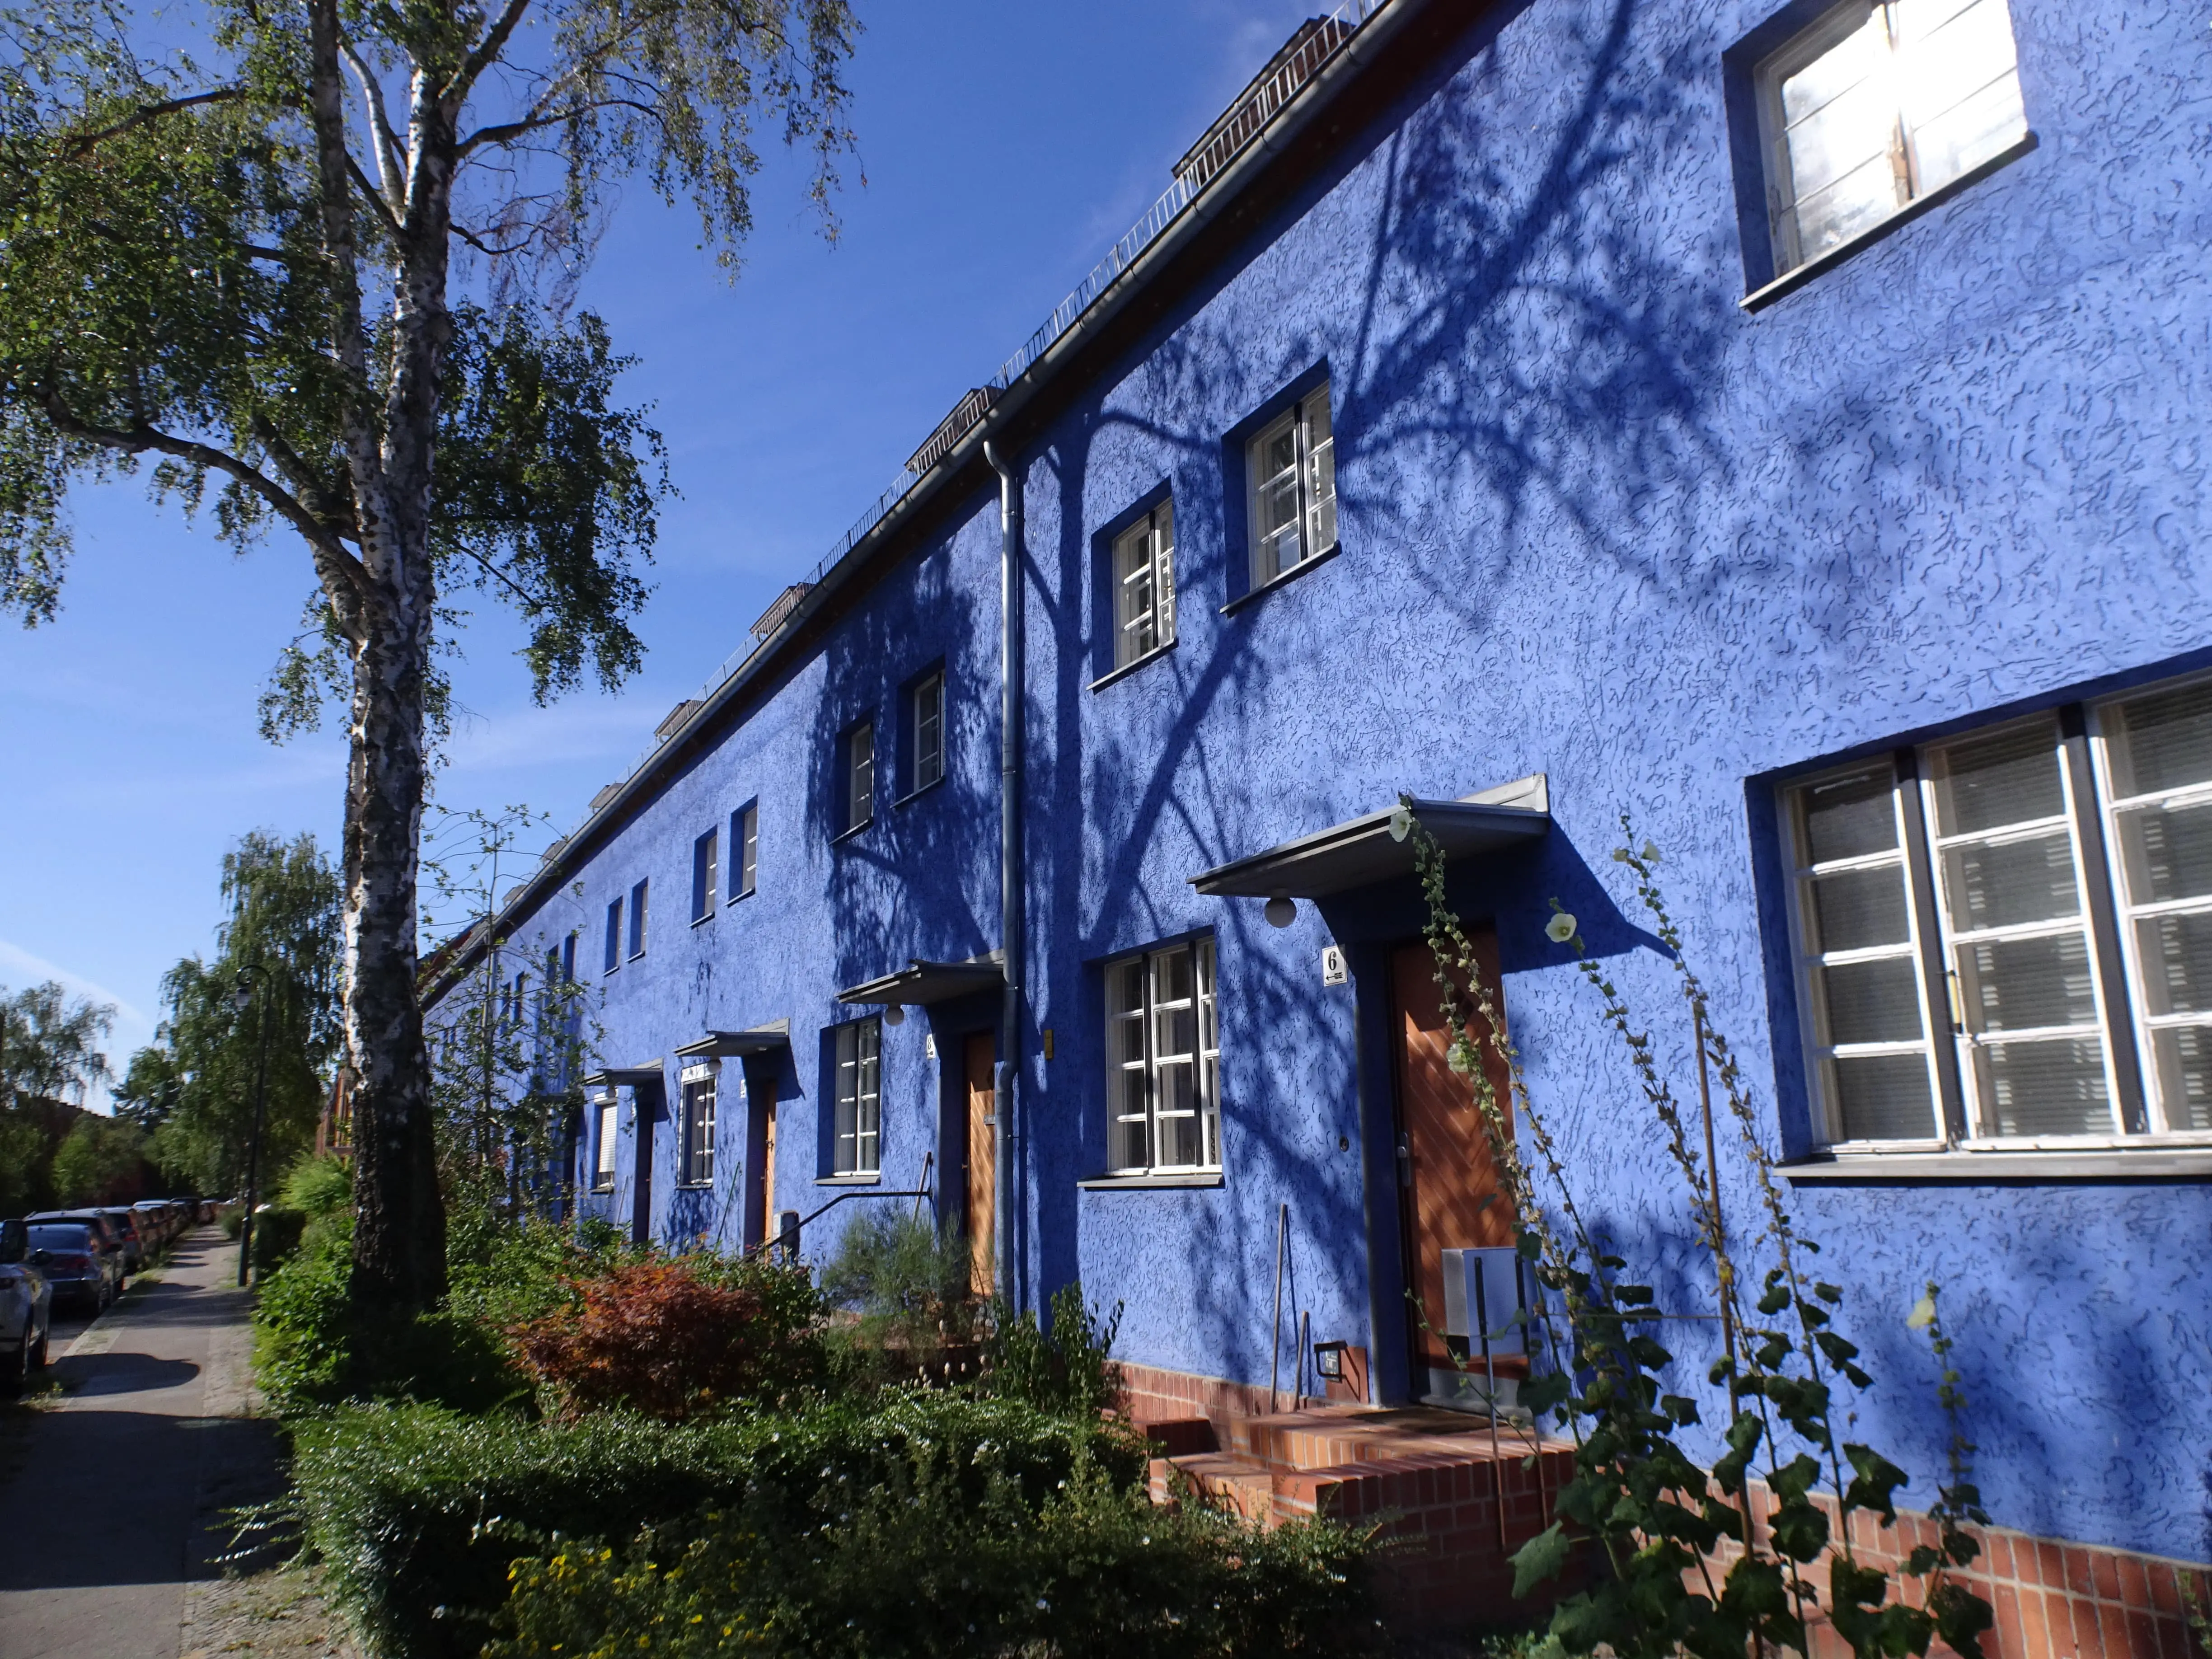 A blue-painted house terrace with small gardens in front